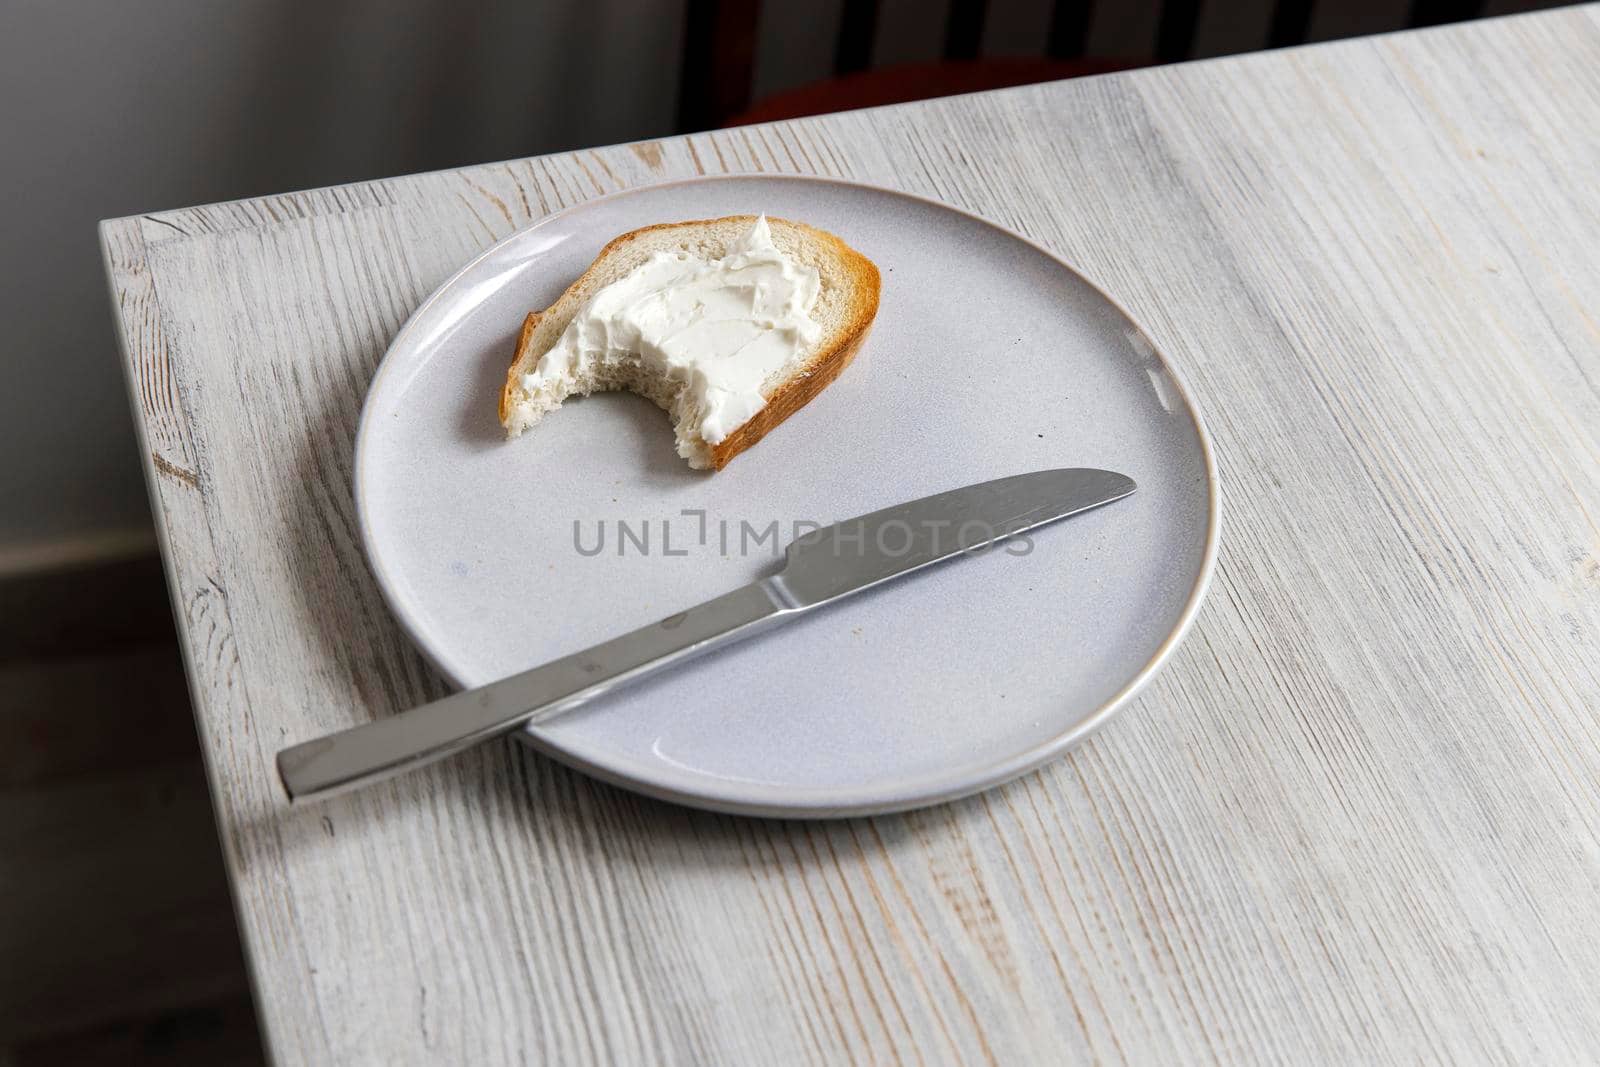 A piece of bread with curd cheese spread on it on a white ceramic plate with a knife on the beige table.